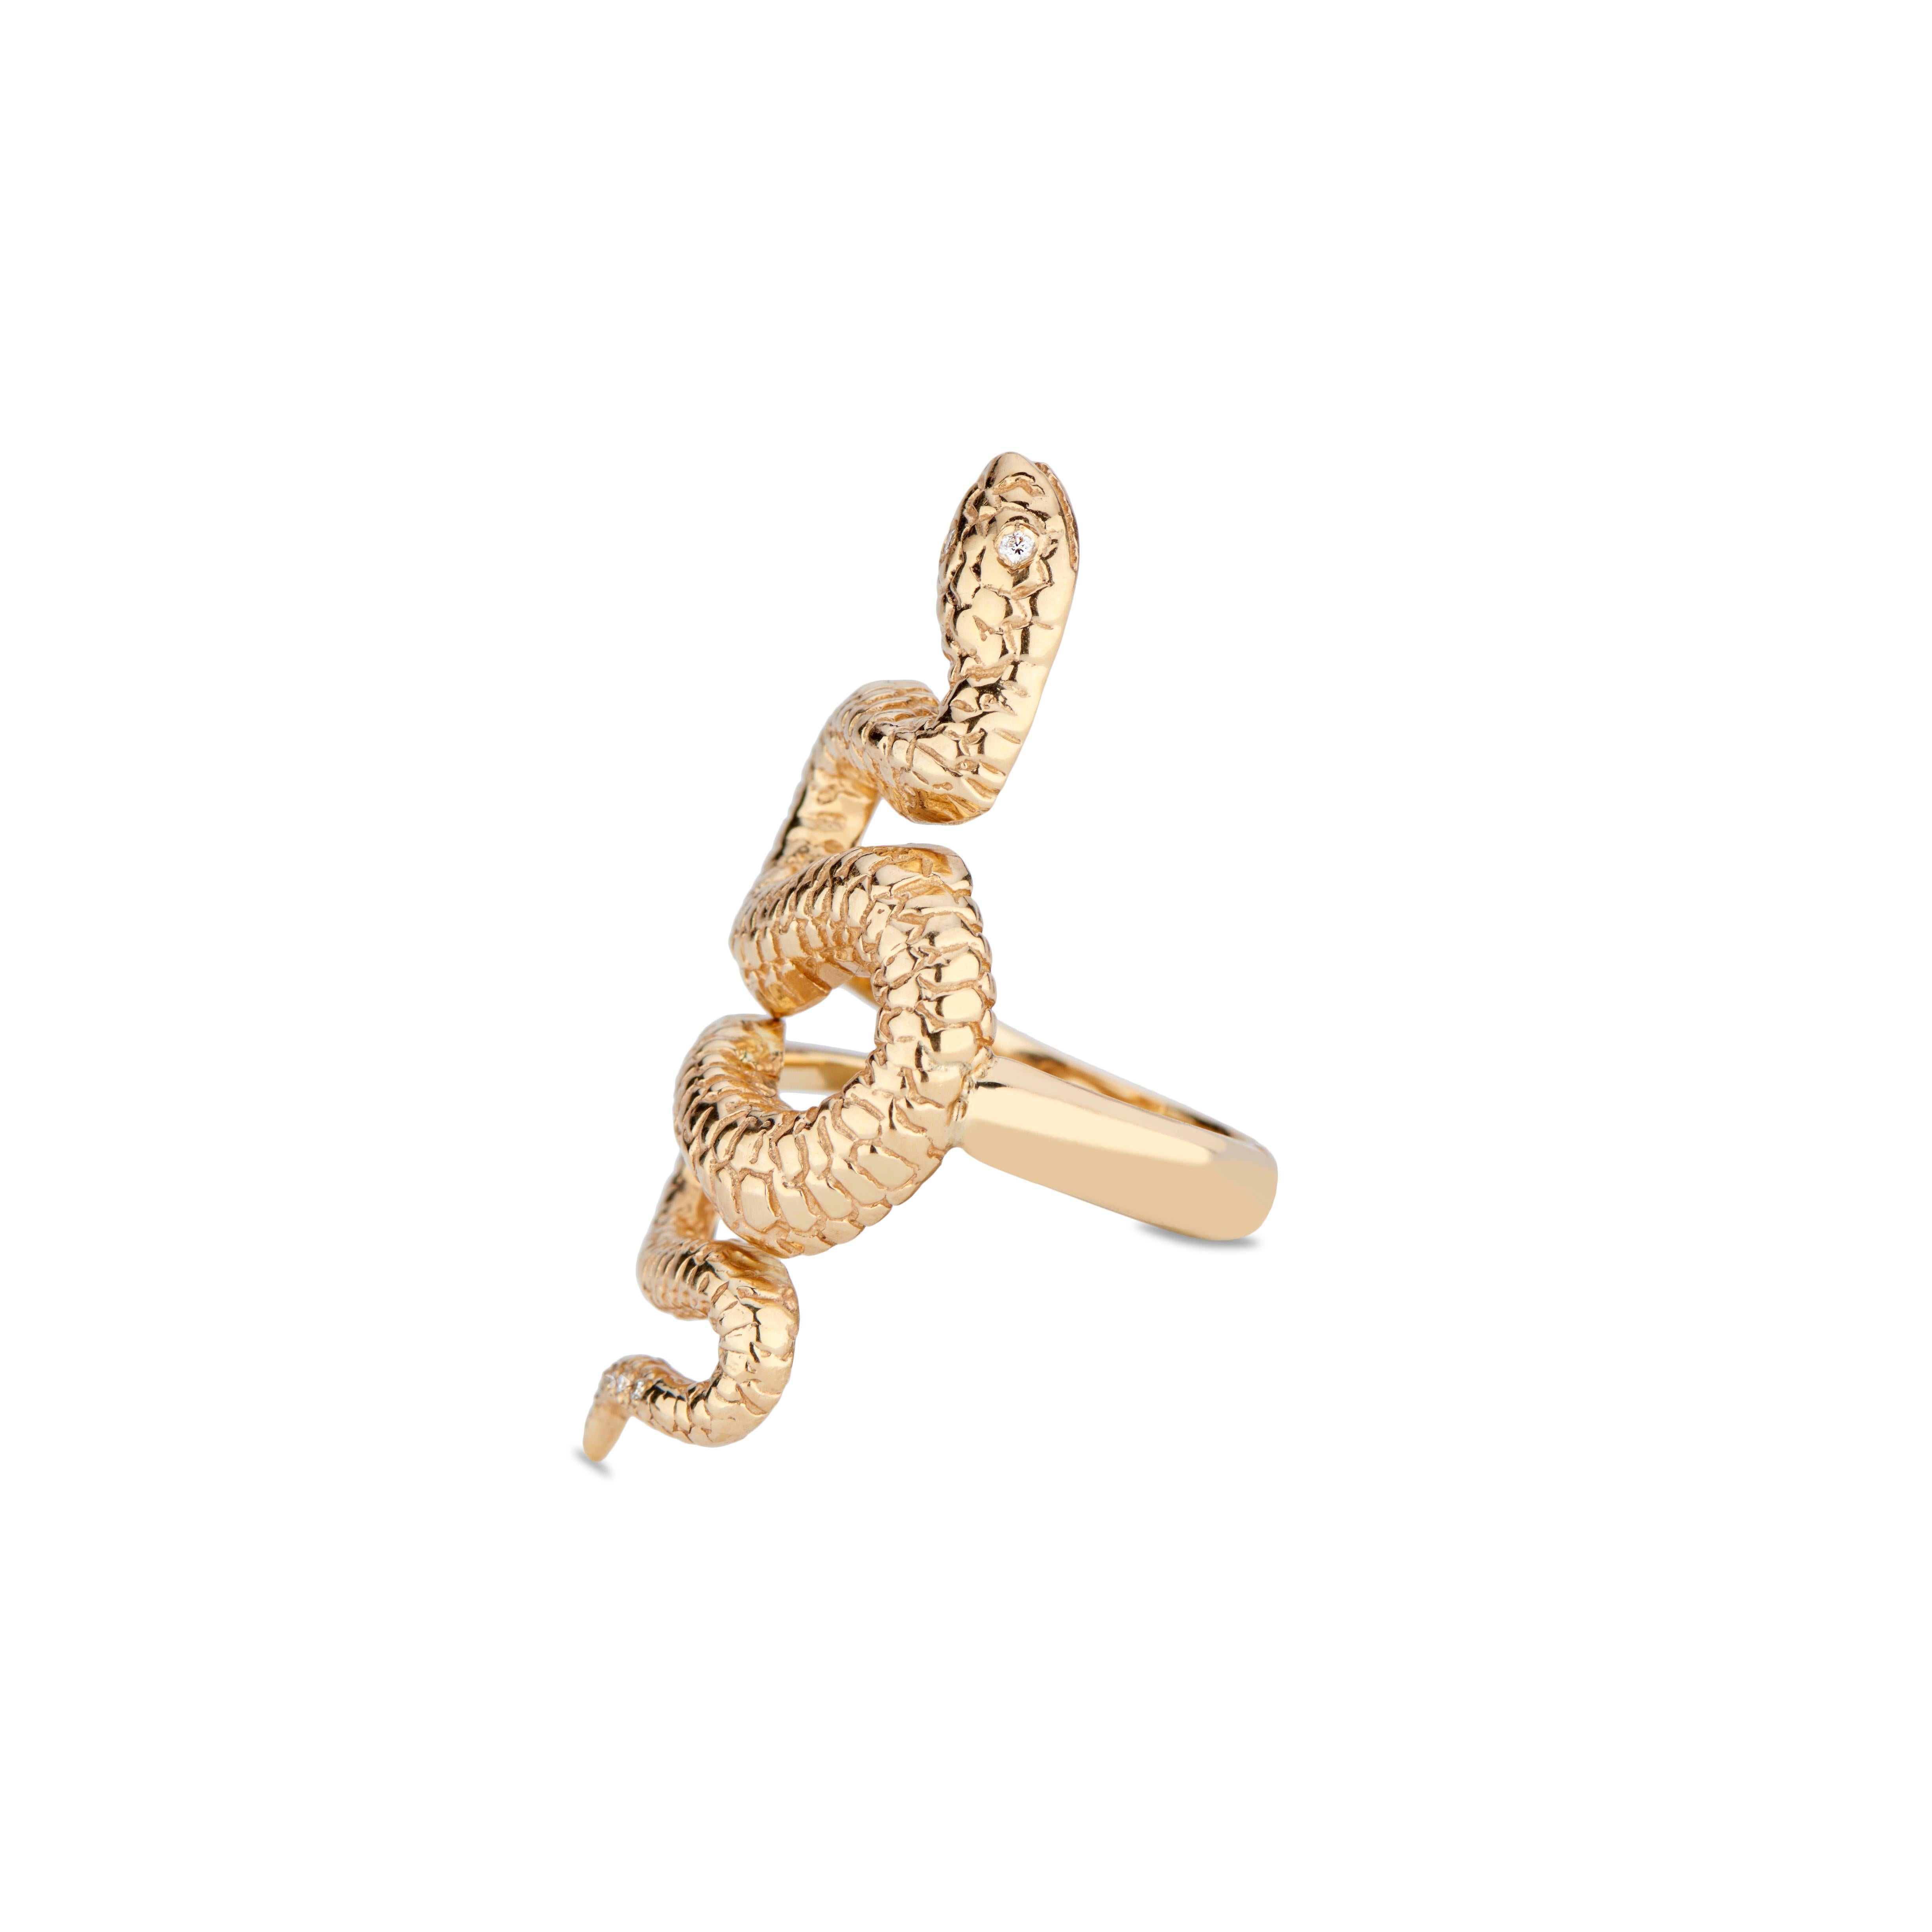 Showing the snake in its entirety, the Snake Ring was designed to be noticed. It has 2 small diamonds set for the eyes and 6 set on its tail. The unique asymmetrical shank features two different views. The snake’s left side is joined to the shank